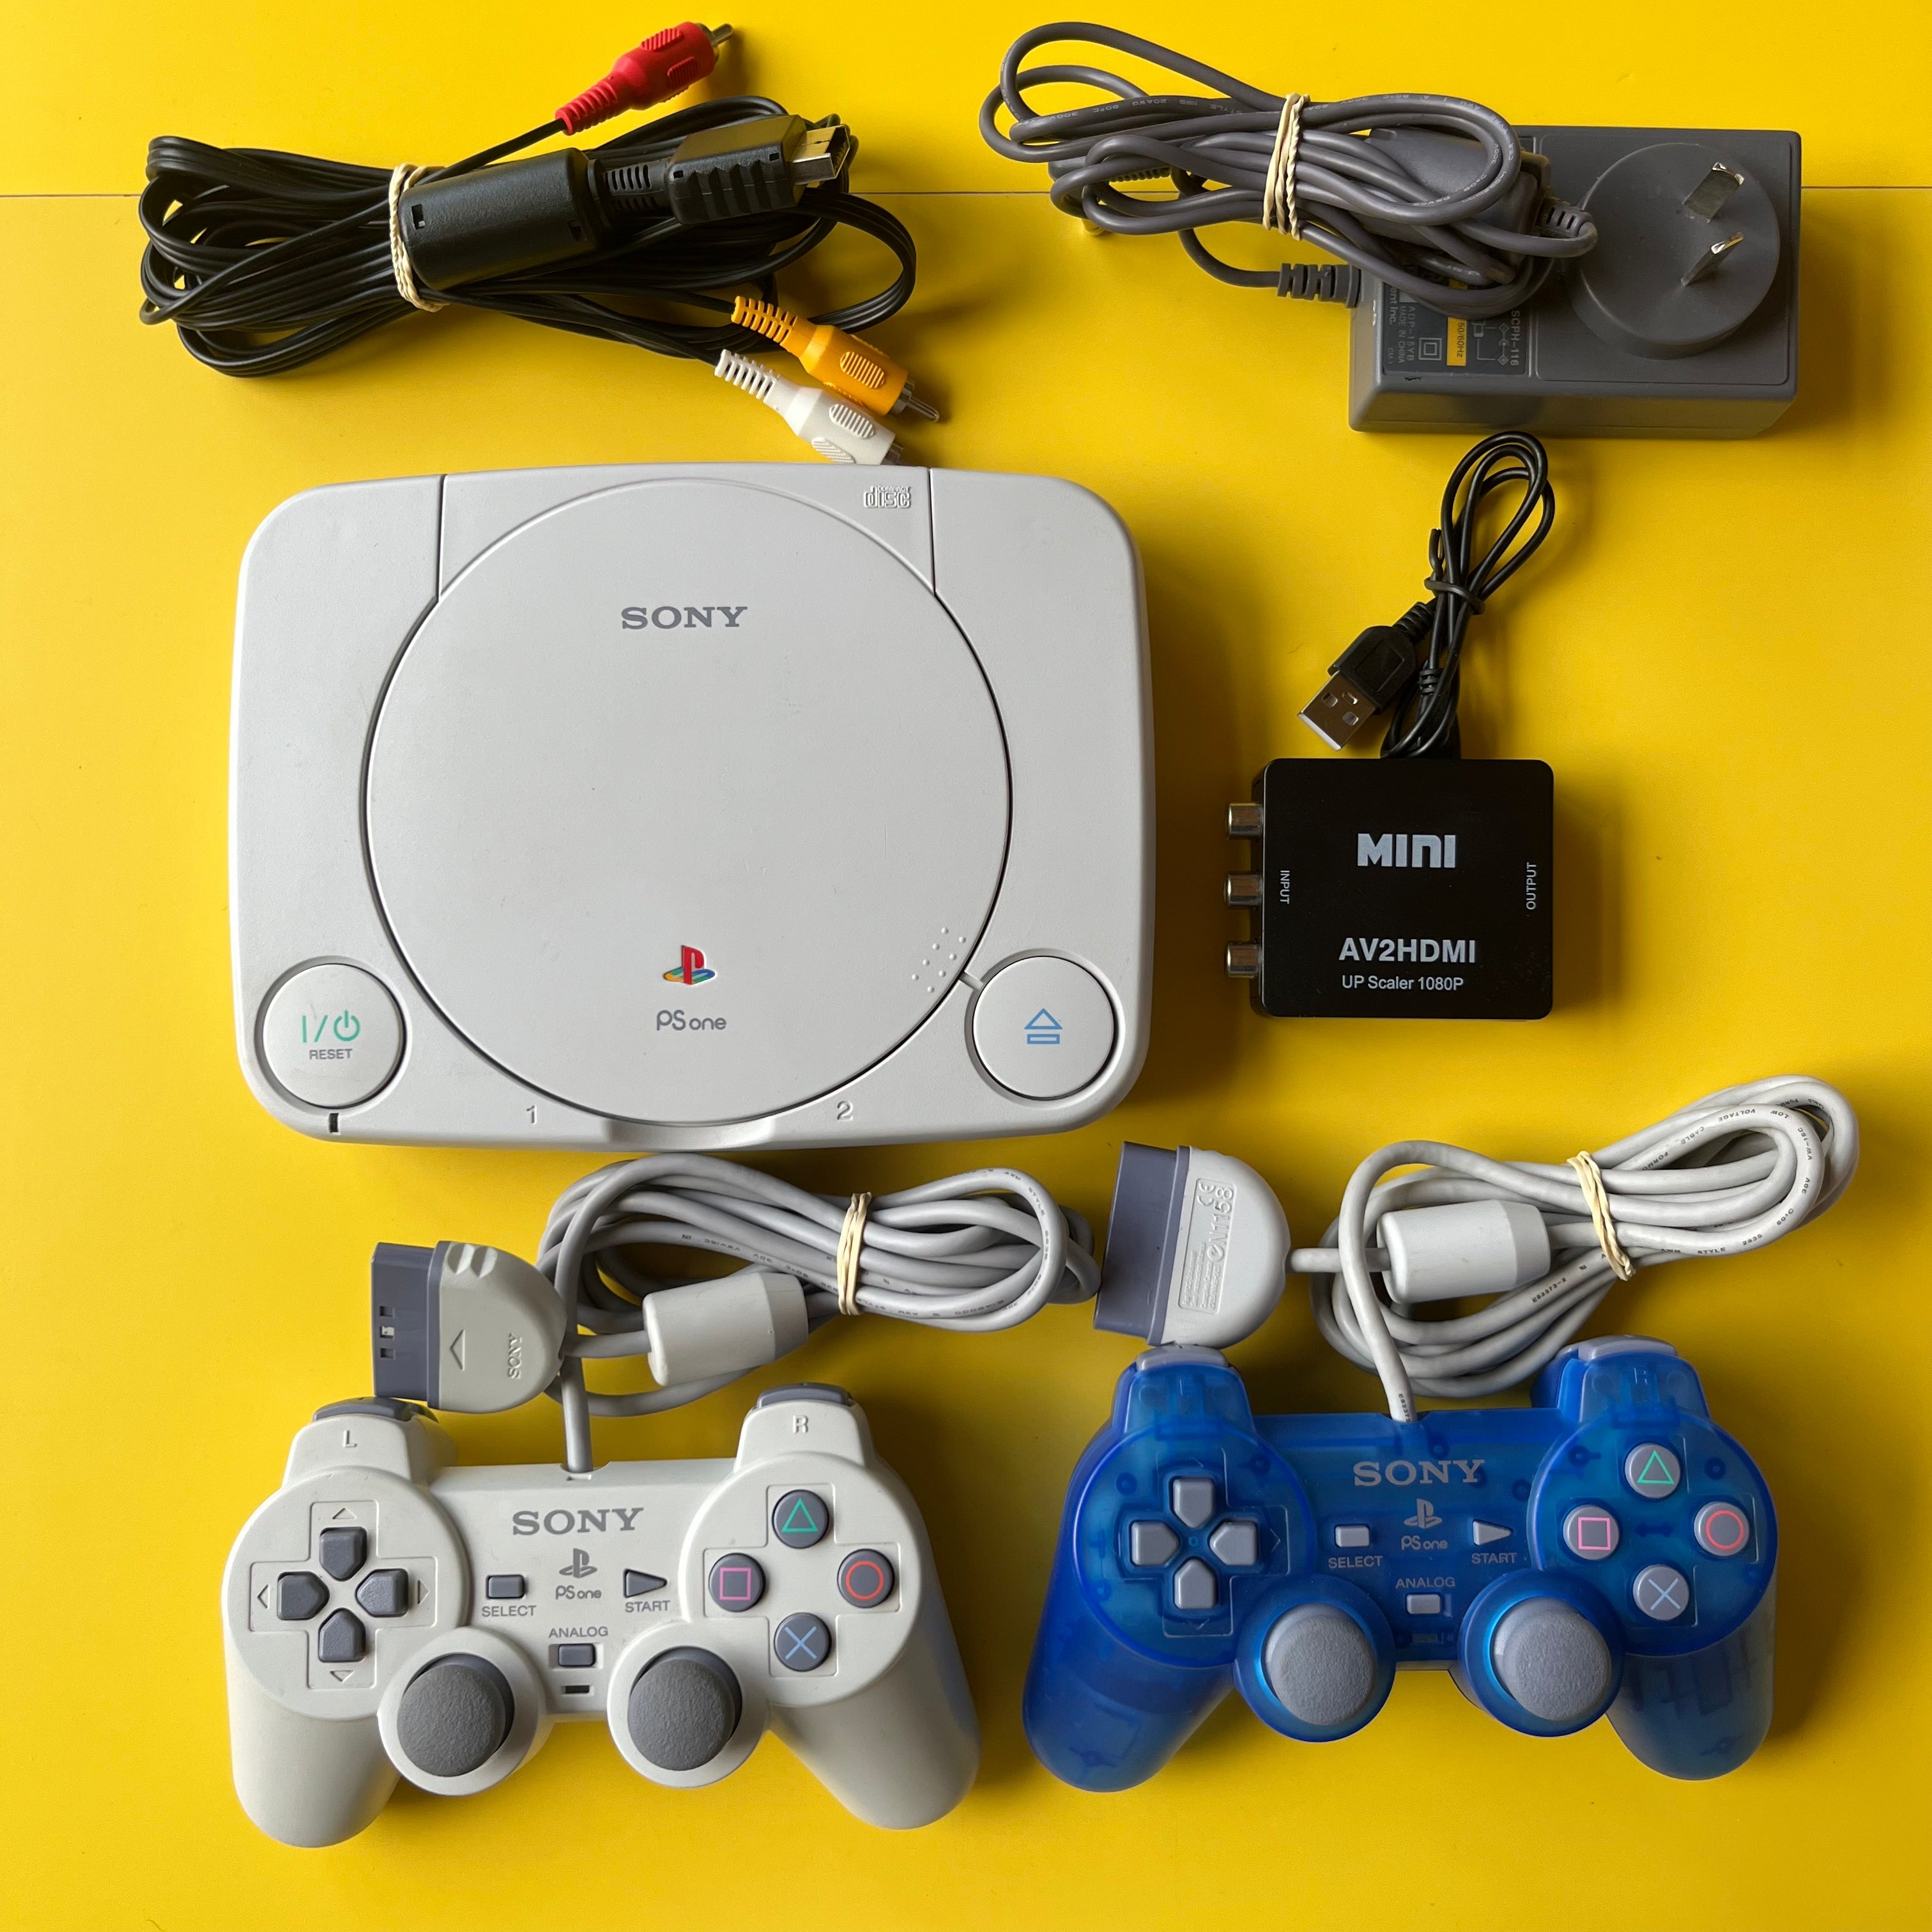 Sony PlayStation 1 Video Game Console for sale online